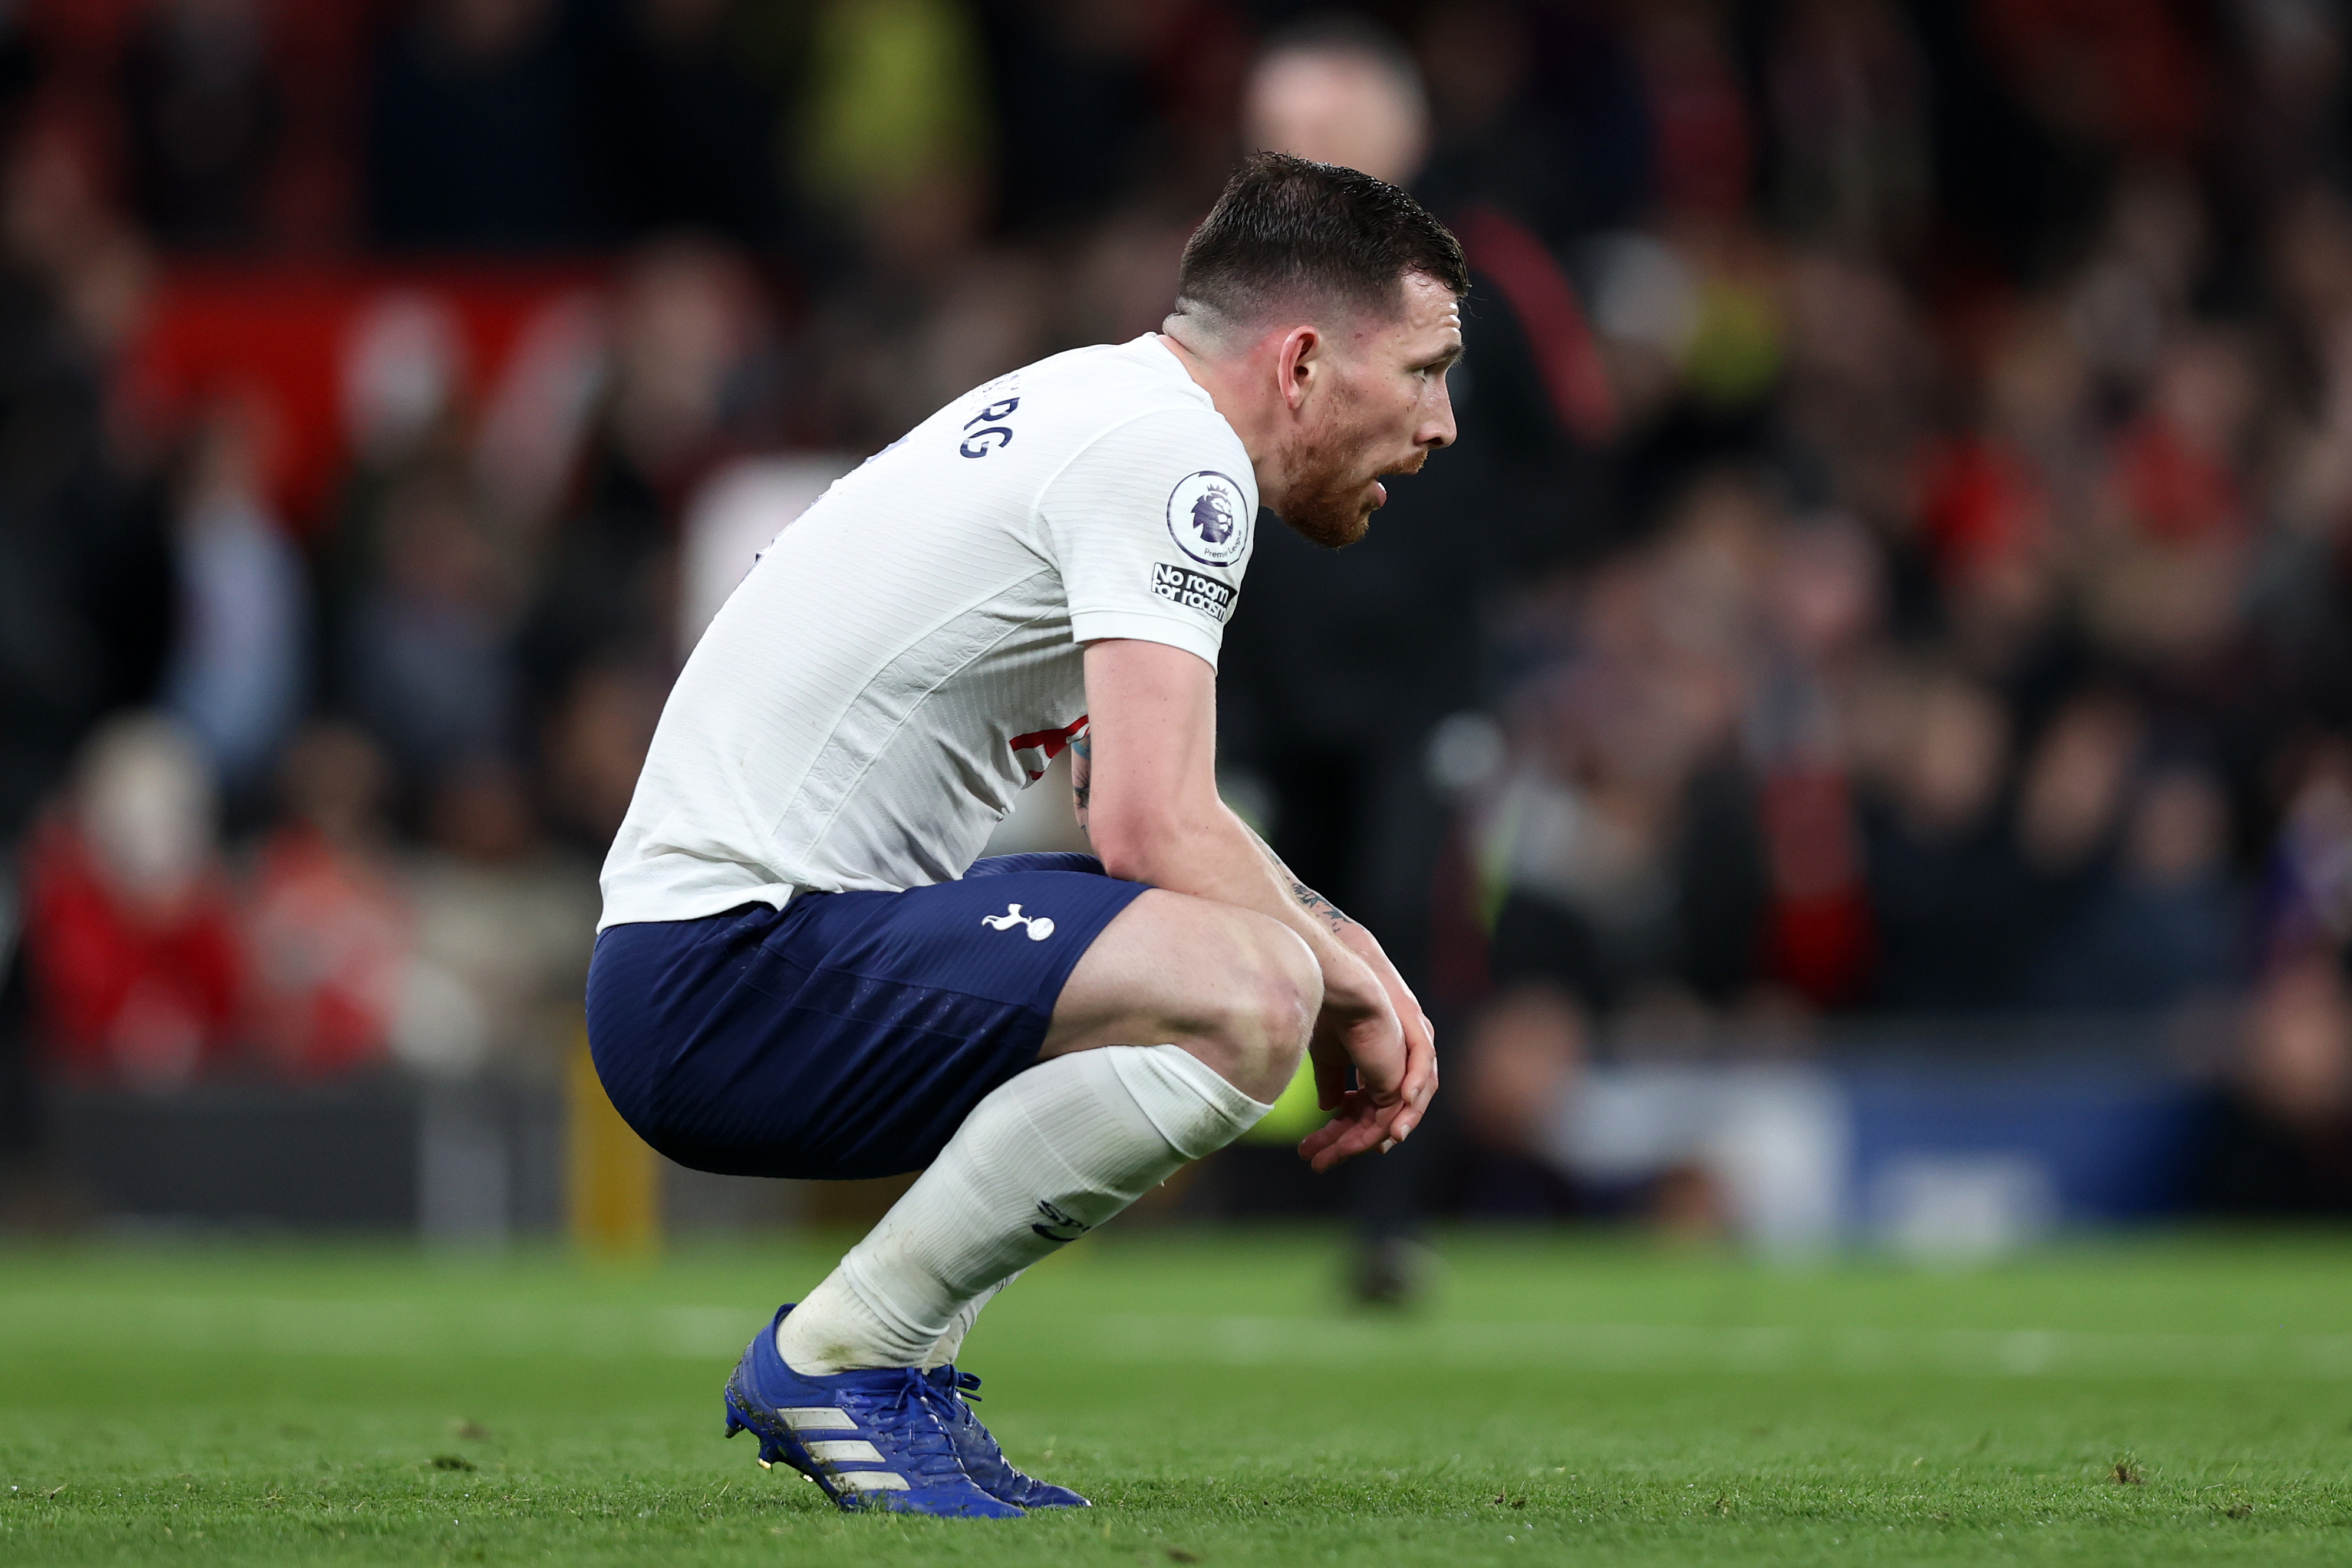 Pierre-Emile Hojbjerg is unhappy with Tottenham manager Ange Postecoglou